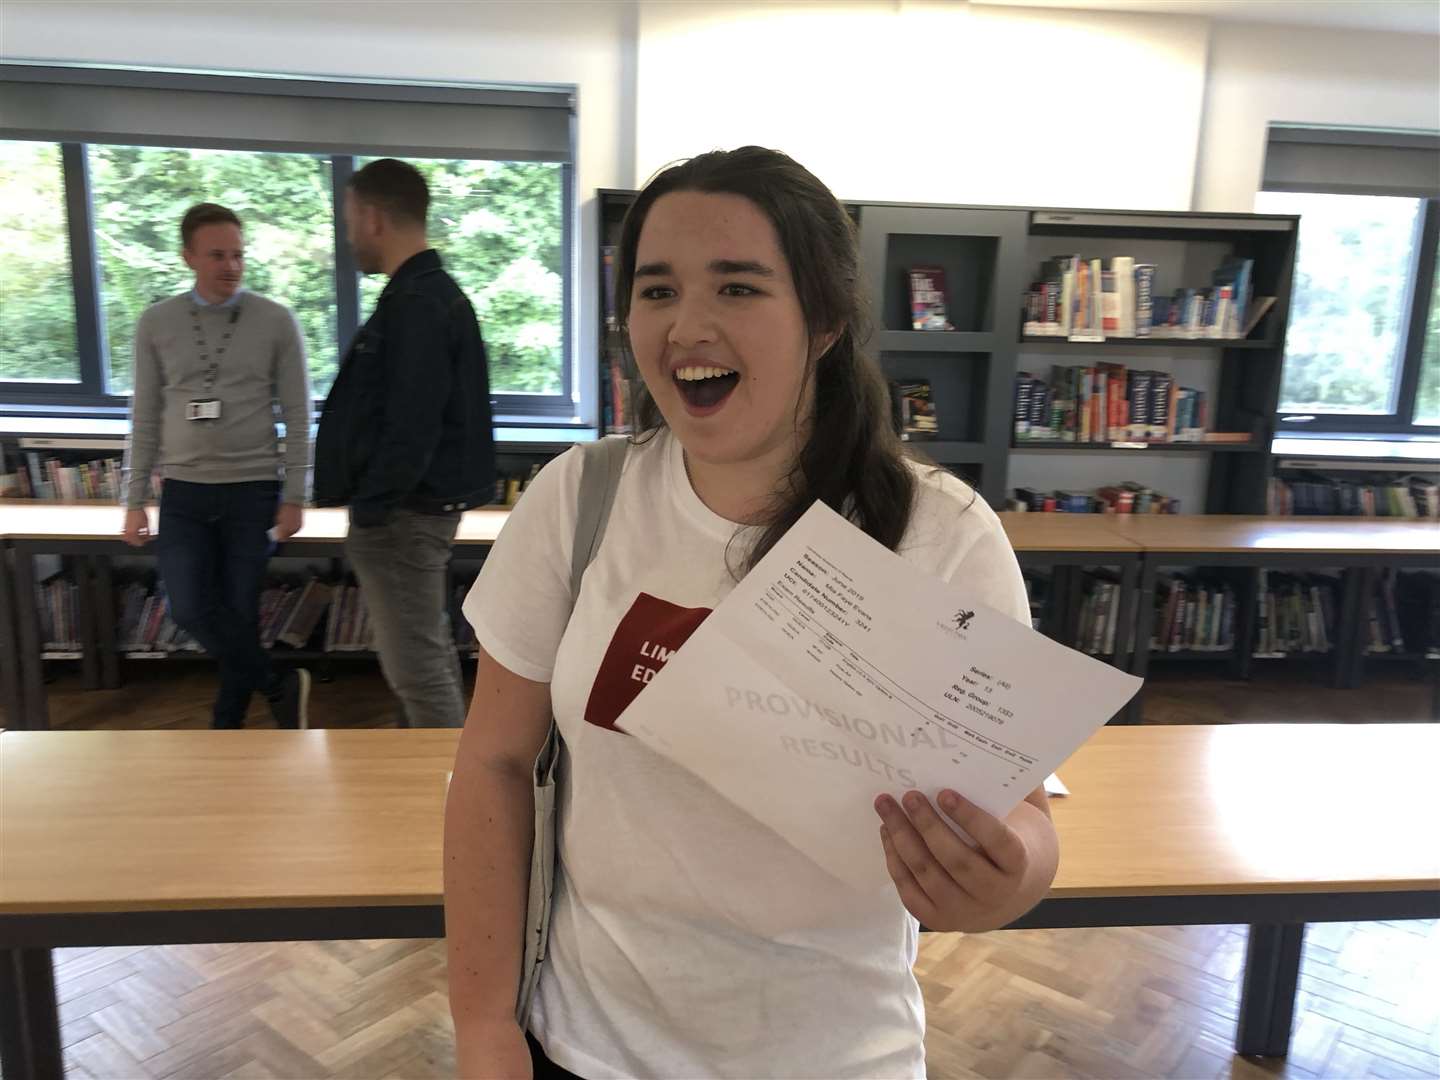 Mia Evans from Valley Park School is going to the University of Kent after getting her A-level results (15287018)